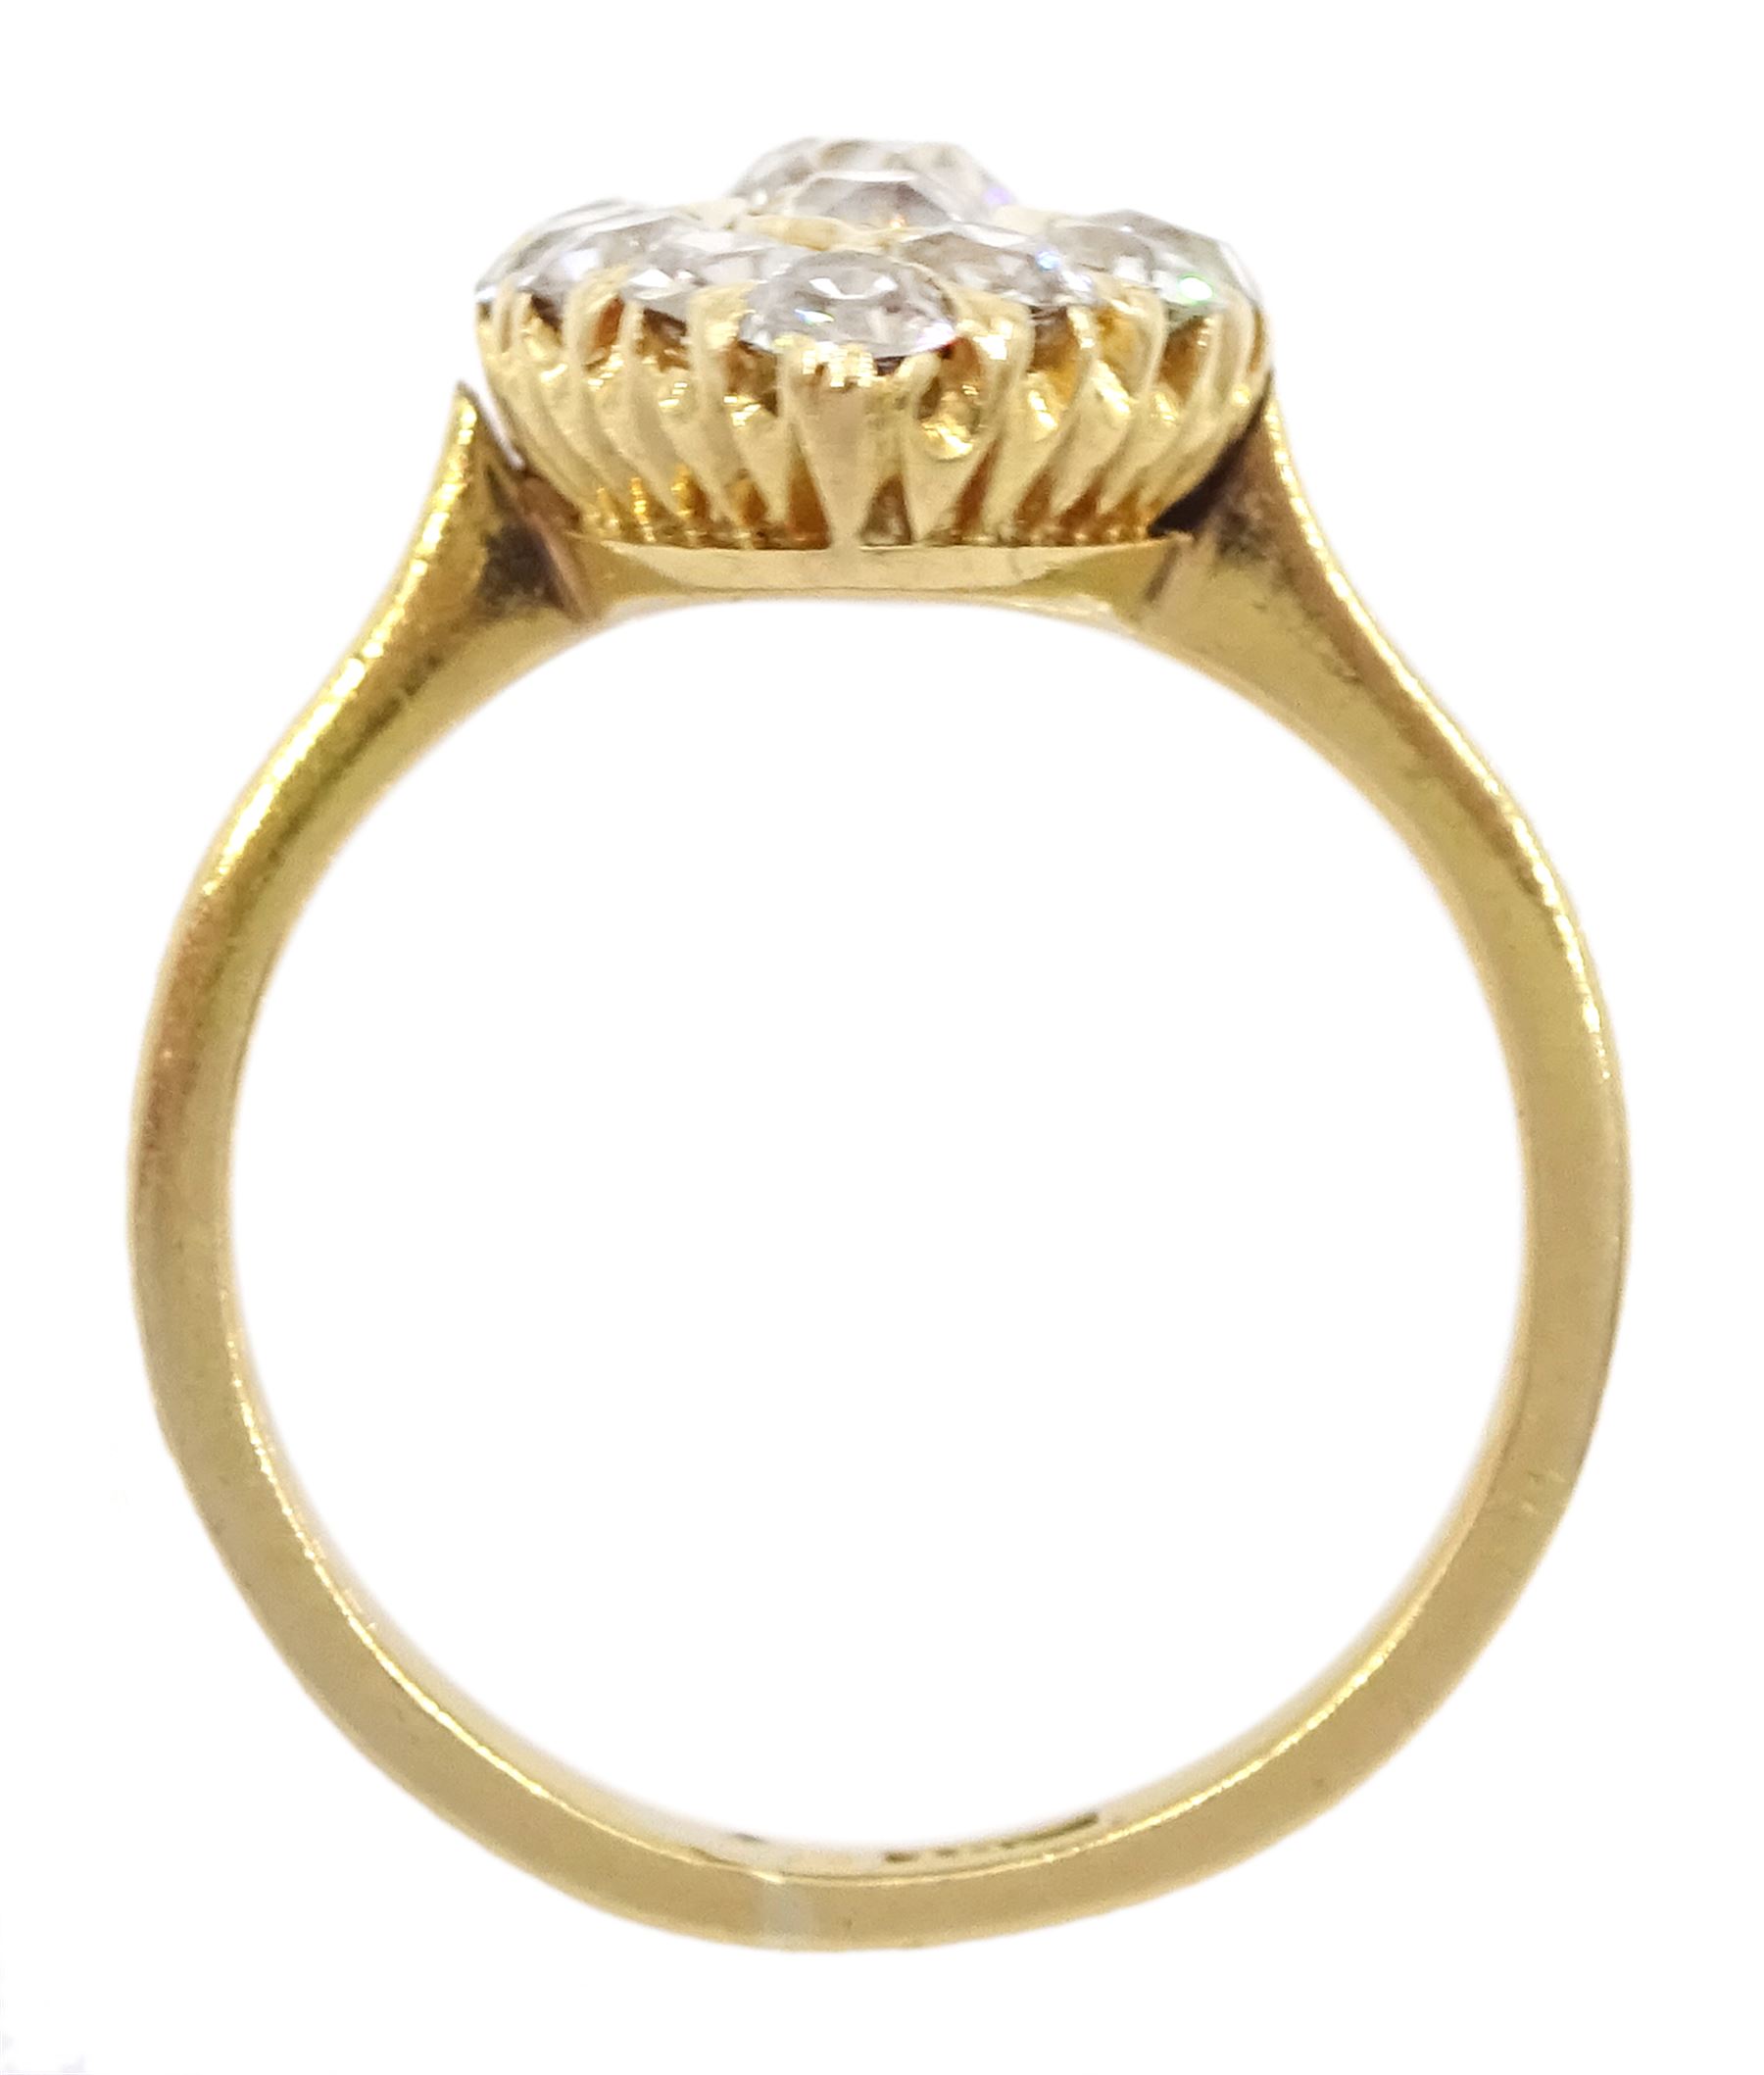 Early 20th century gold old cut diamond marquise shaped ring - Image 4 of 4